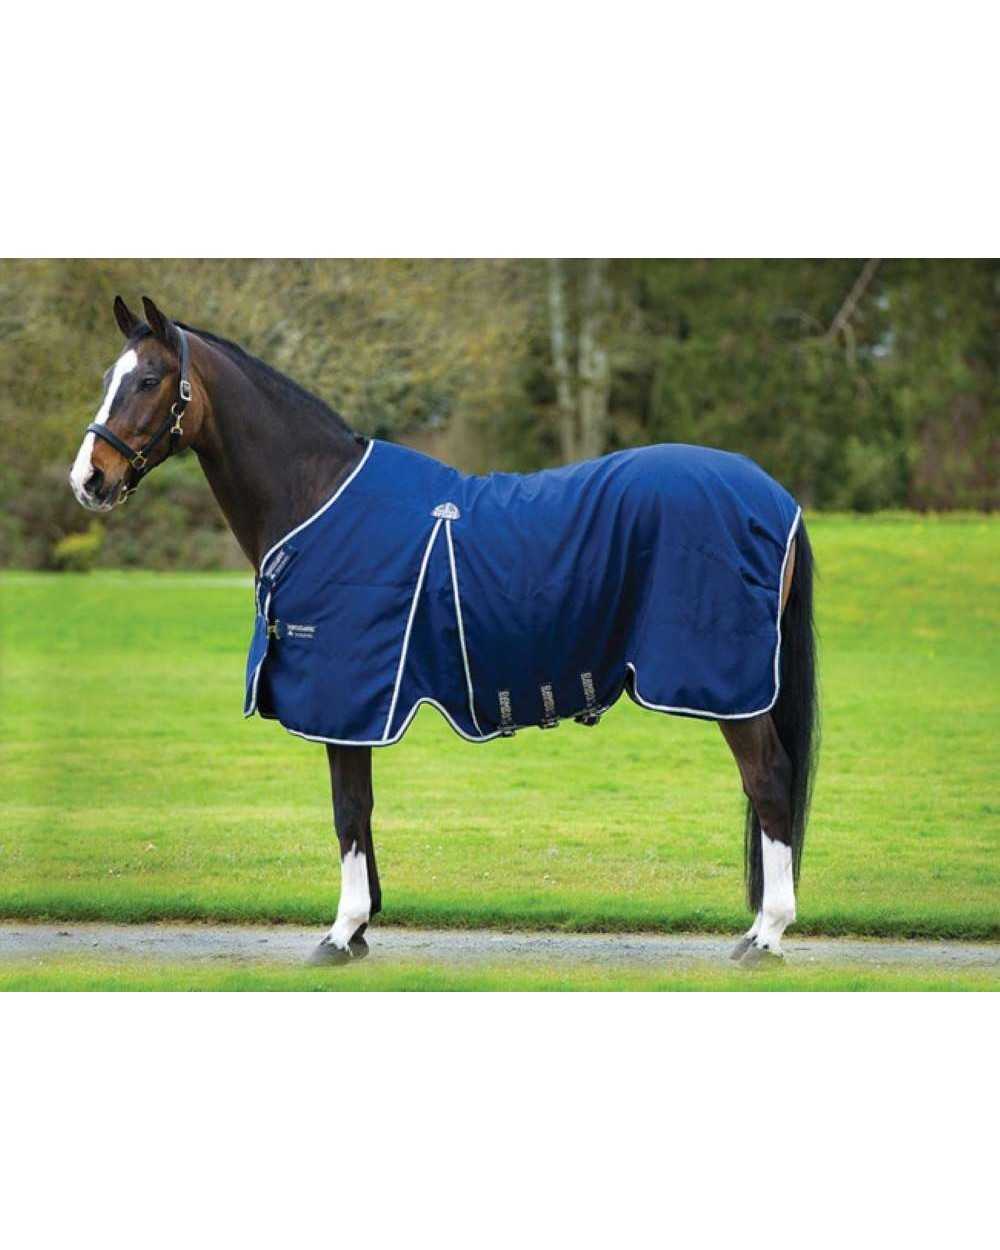 Chemise de box, Rambo optimo stable sheet - Lite 0g ADAO40 Horseware Couvertures